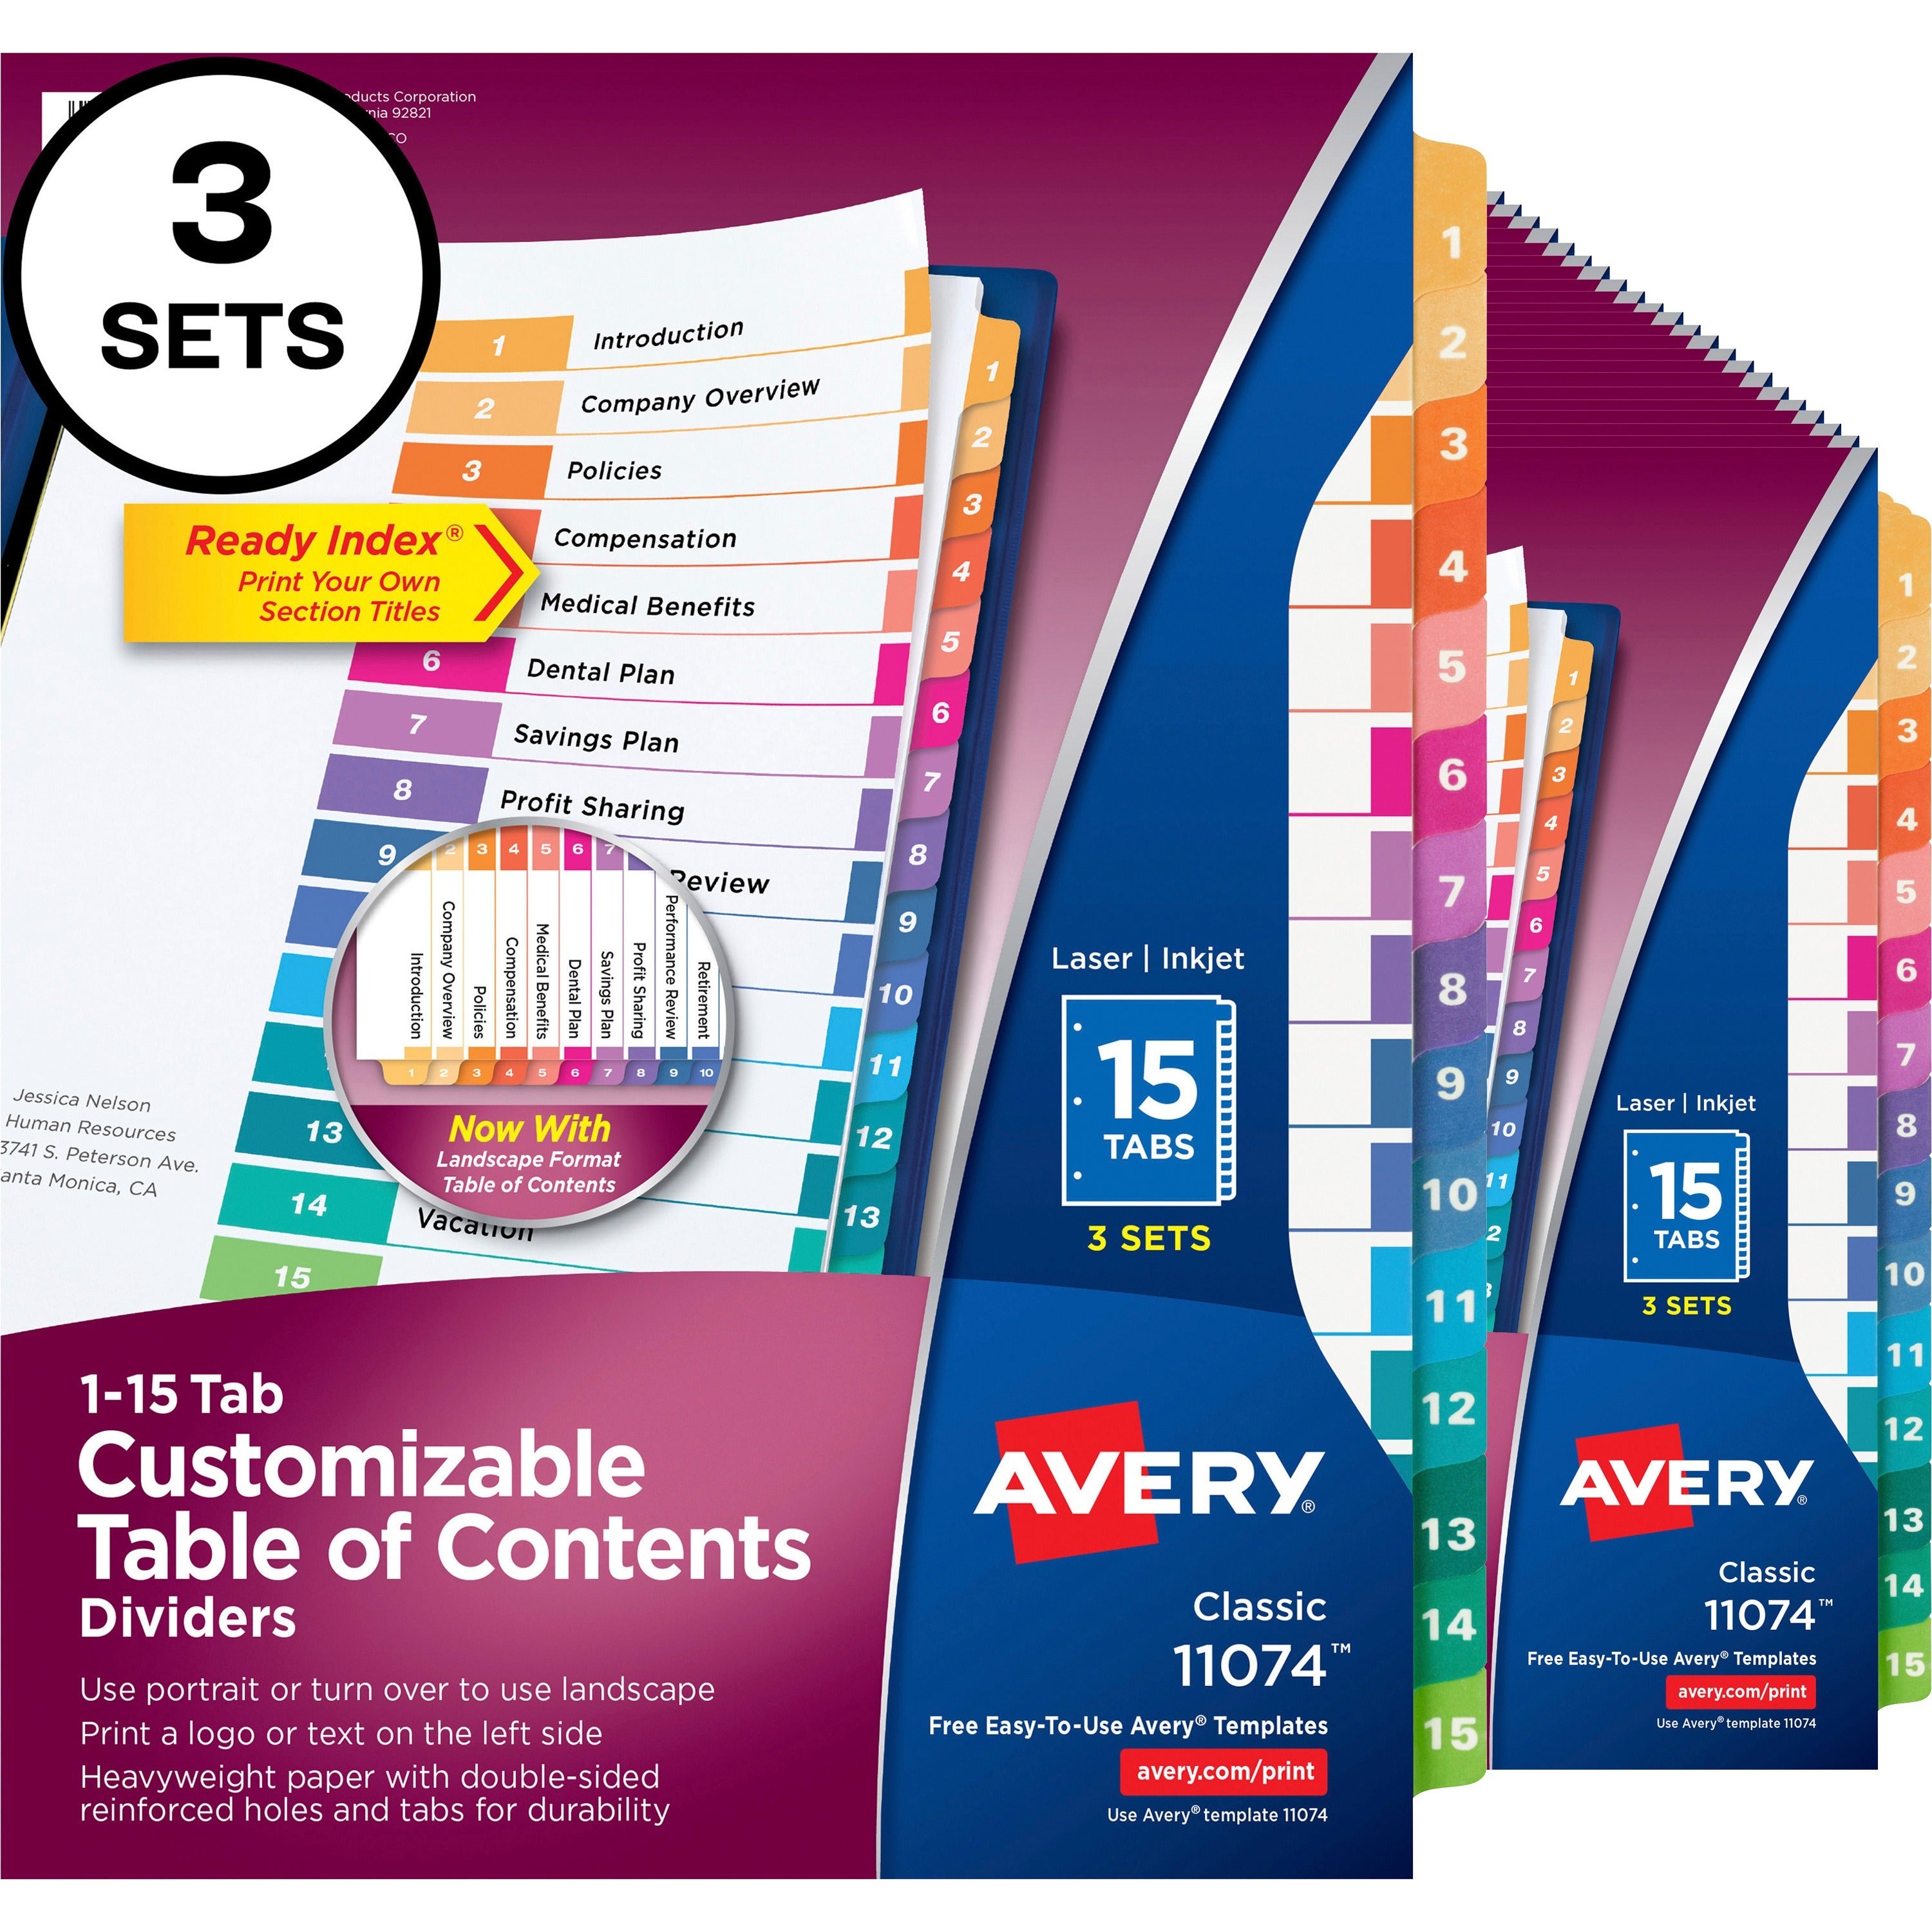 avery-customizable-table-of-contents-dividers-ready-indexr-printable-section-titles-preprinted-1-15-multicolor-tabs-3-sets-11074_ave11074 - 1